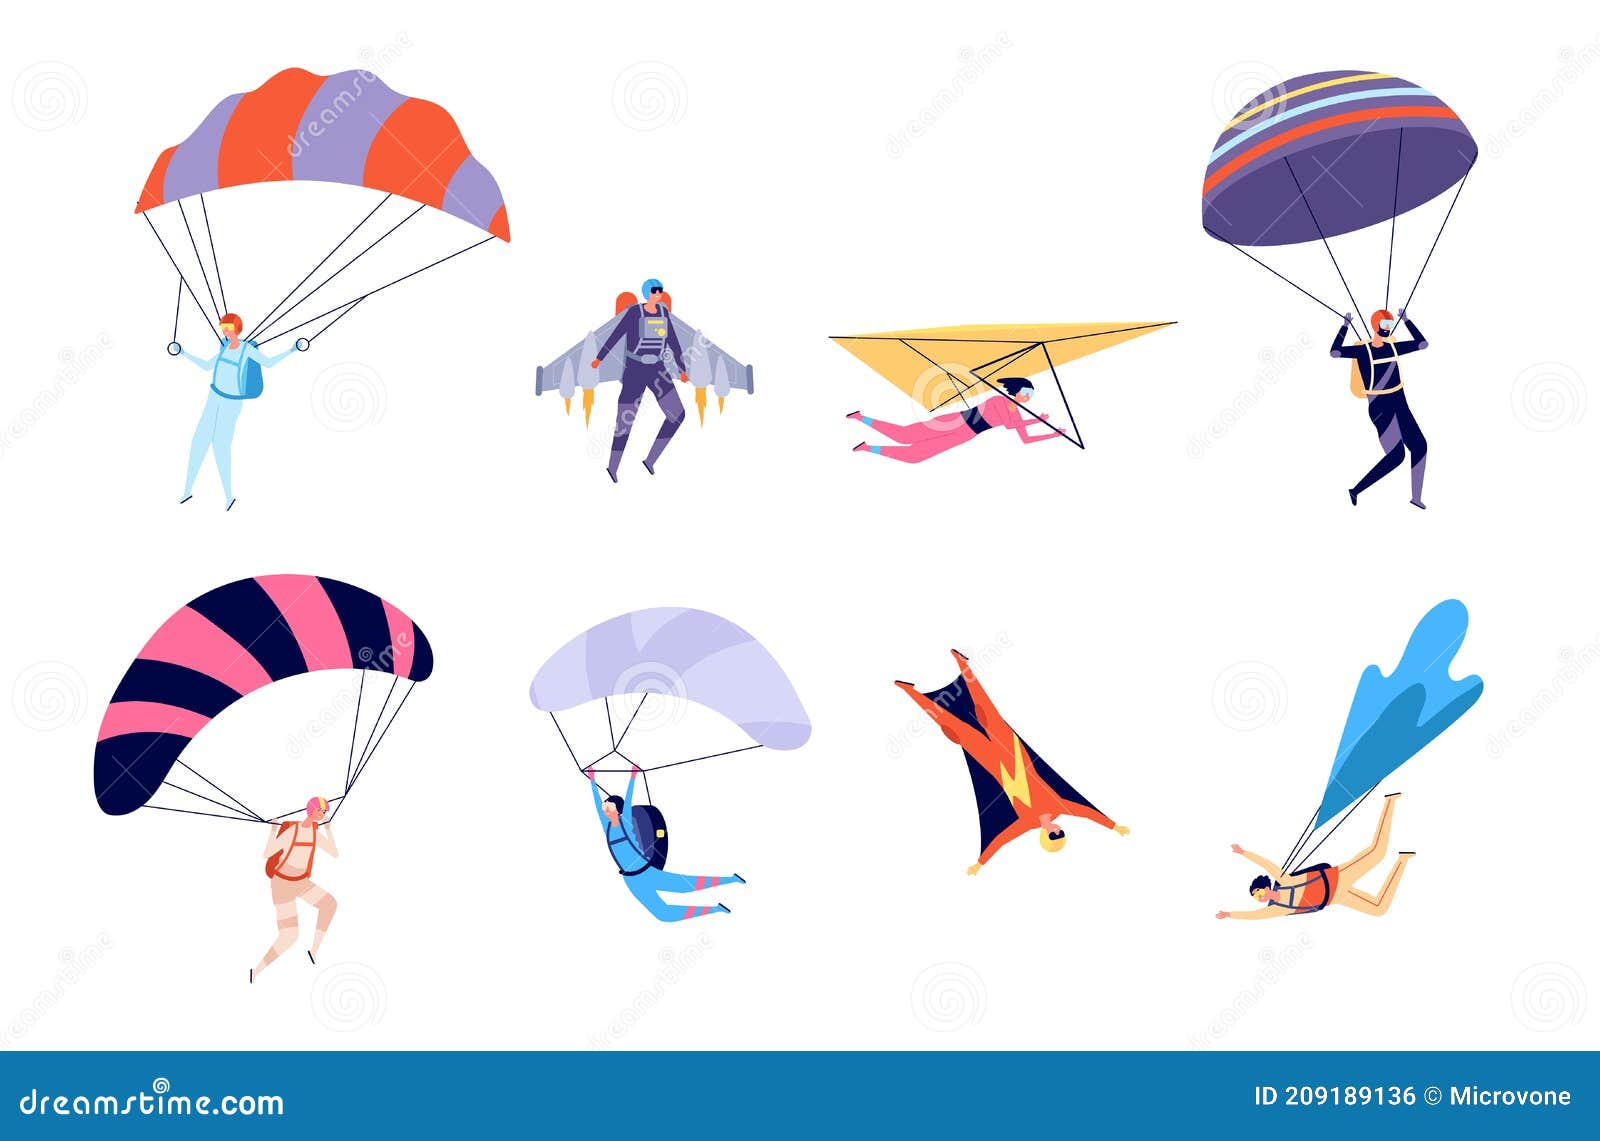 extreme sports. recreation, parachute sportsman jumps. active hobbies, people on gliders paraglider flying, skydive